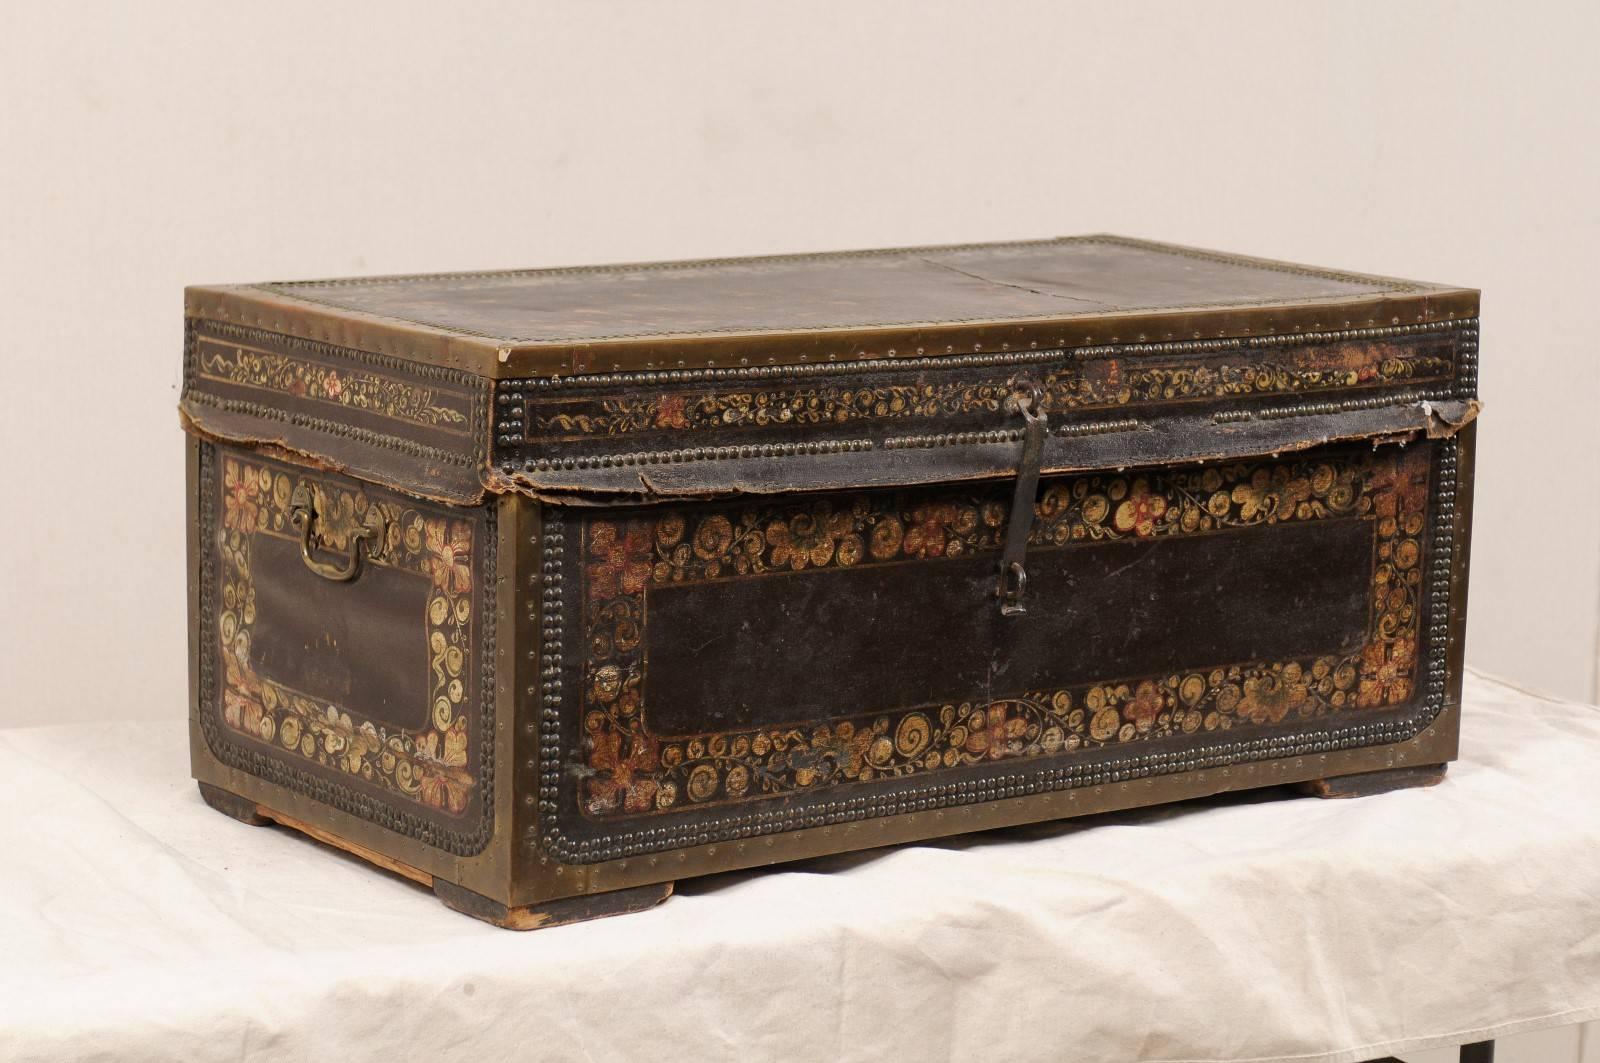 A 19th century Chinese camphor wood trunk. This antique Chinese camphor wood chest features a beautifully hand-painted flower motif on it's leather covered exterior, adorn with a decorative trimming of nail heads, and brass bound edges. The chest